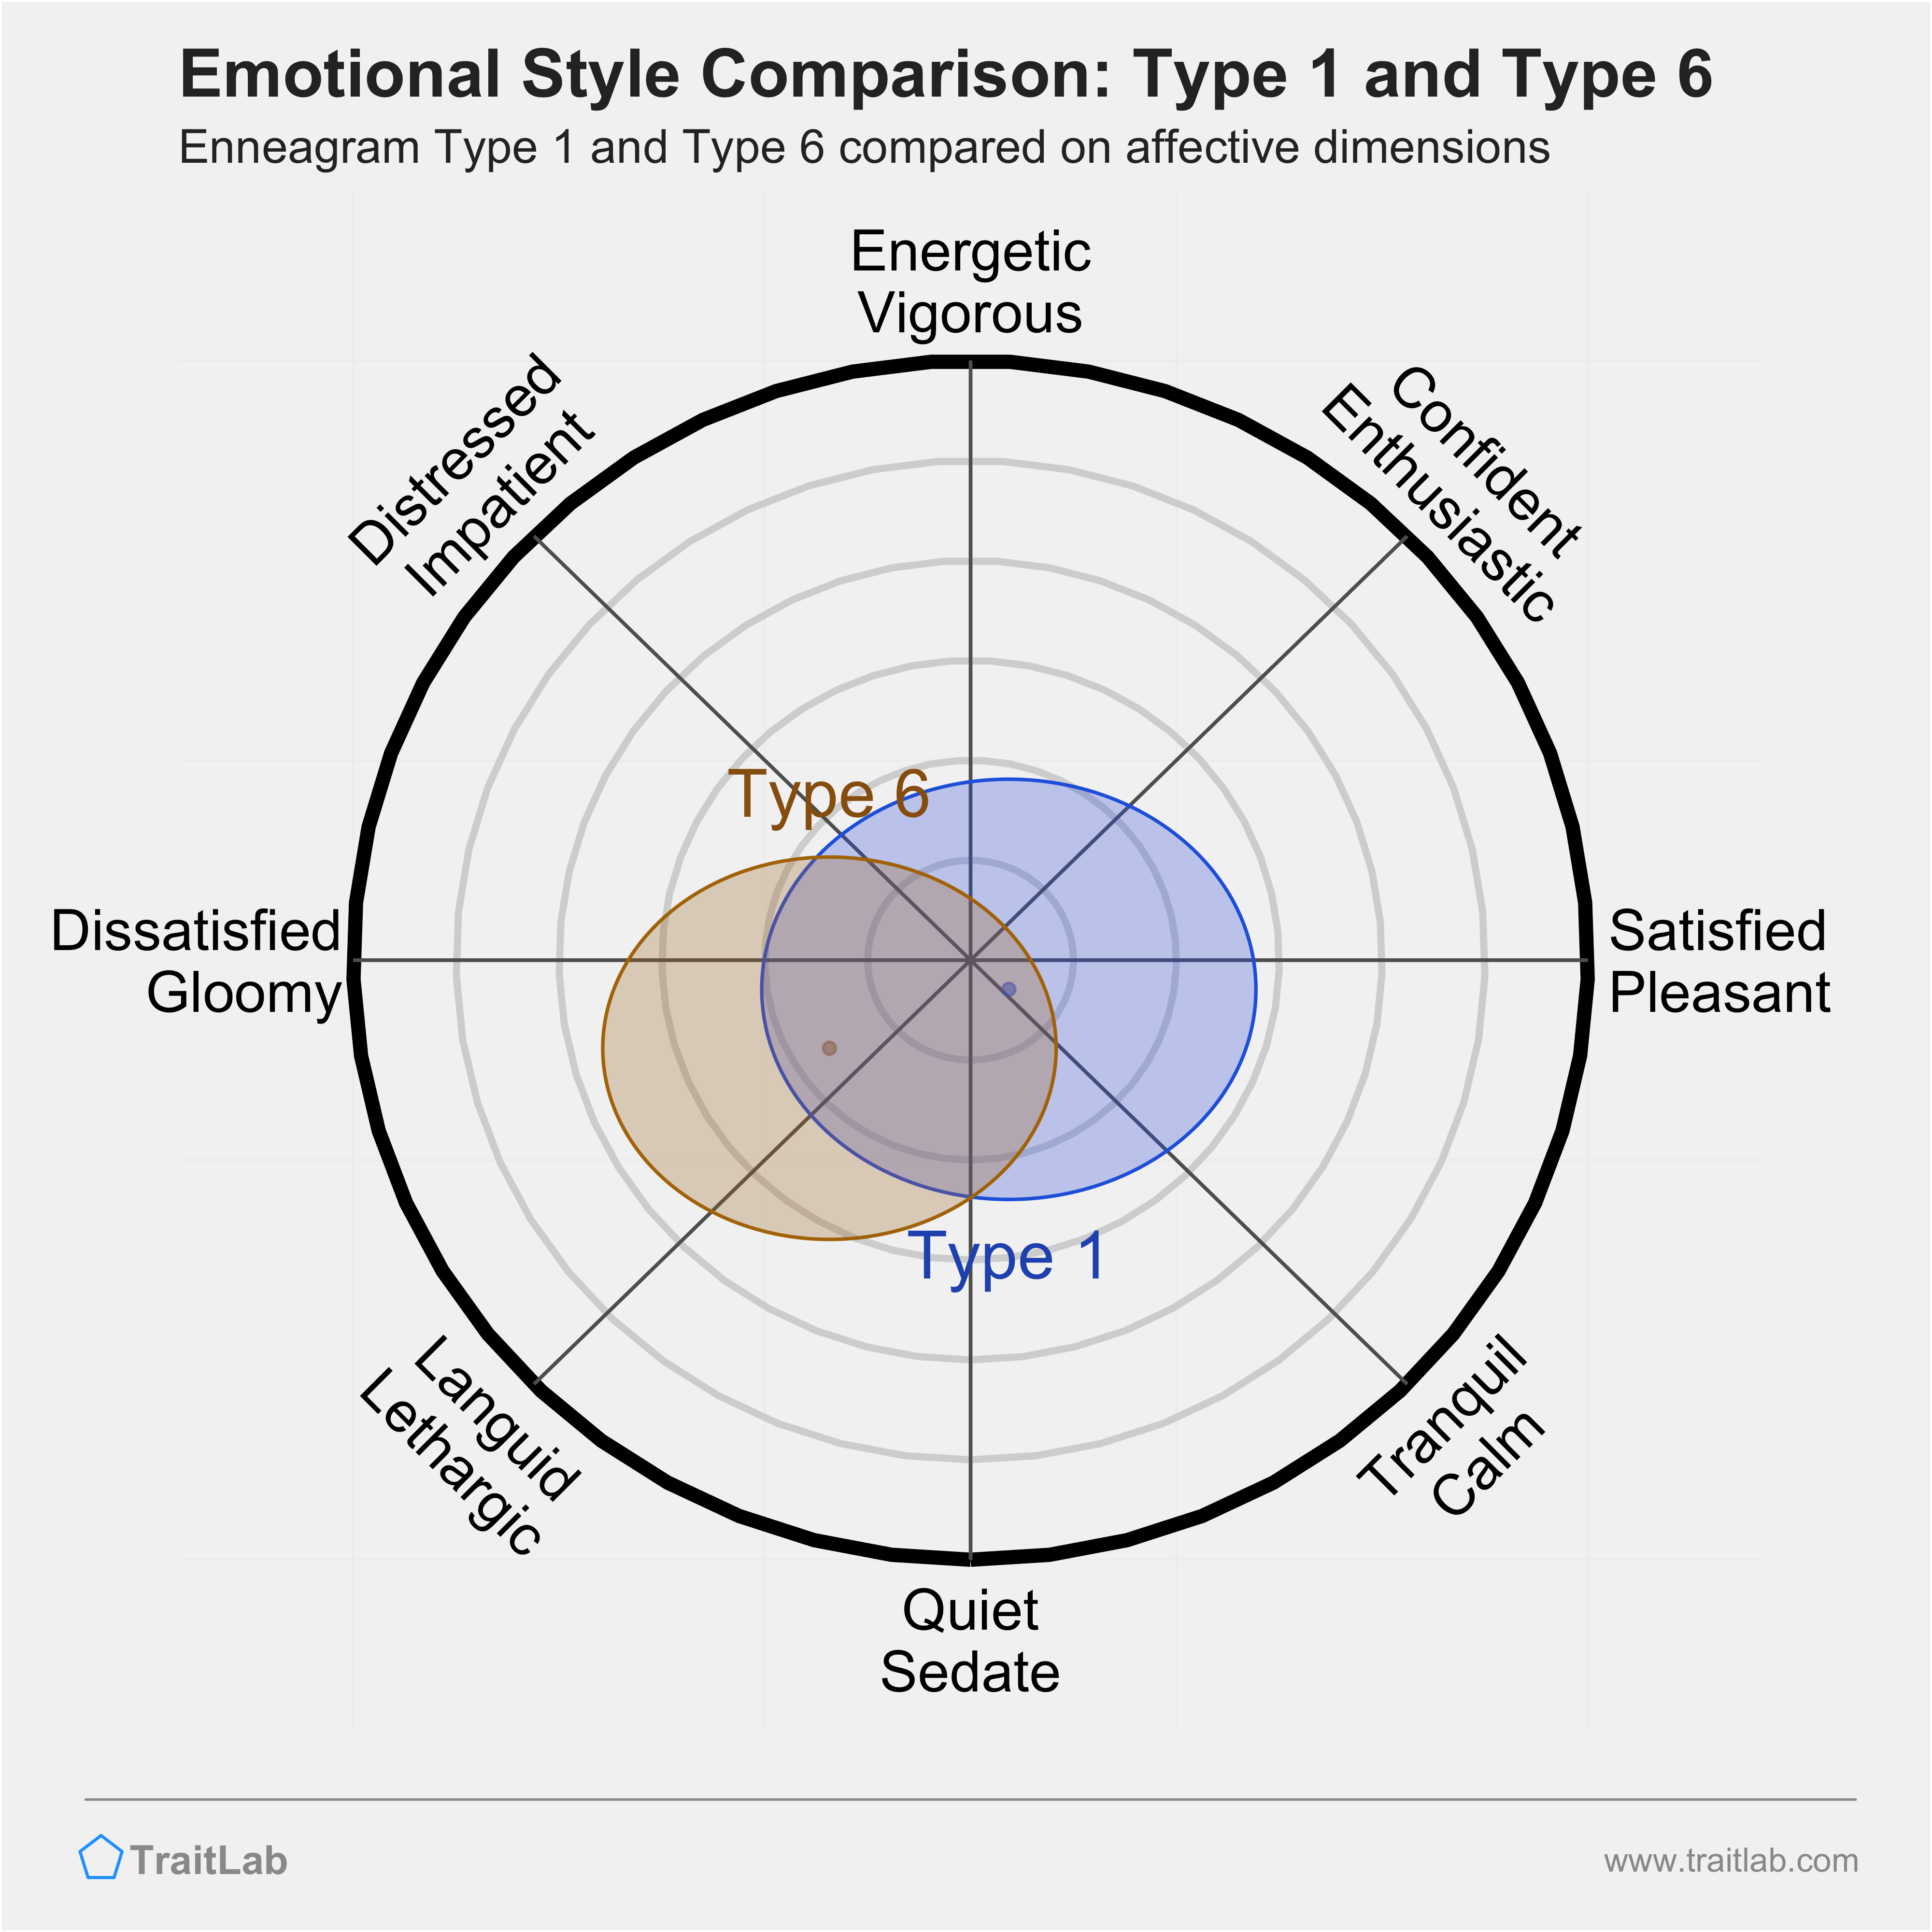 Type 1 and Type 6 comparison across emotional (affective) dimensions